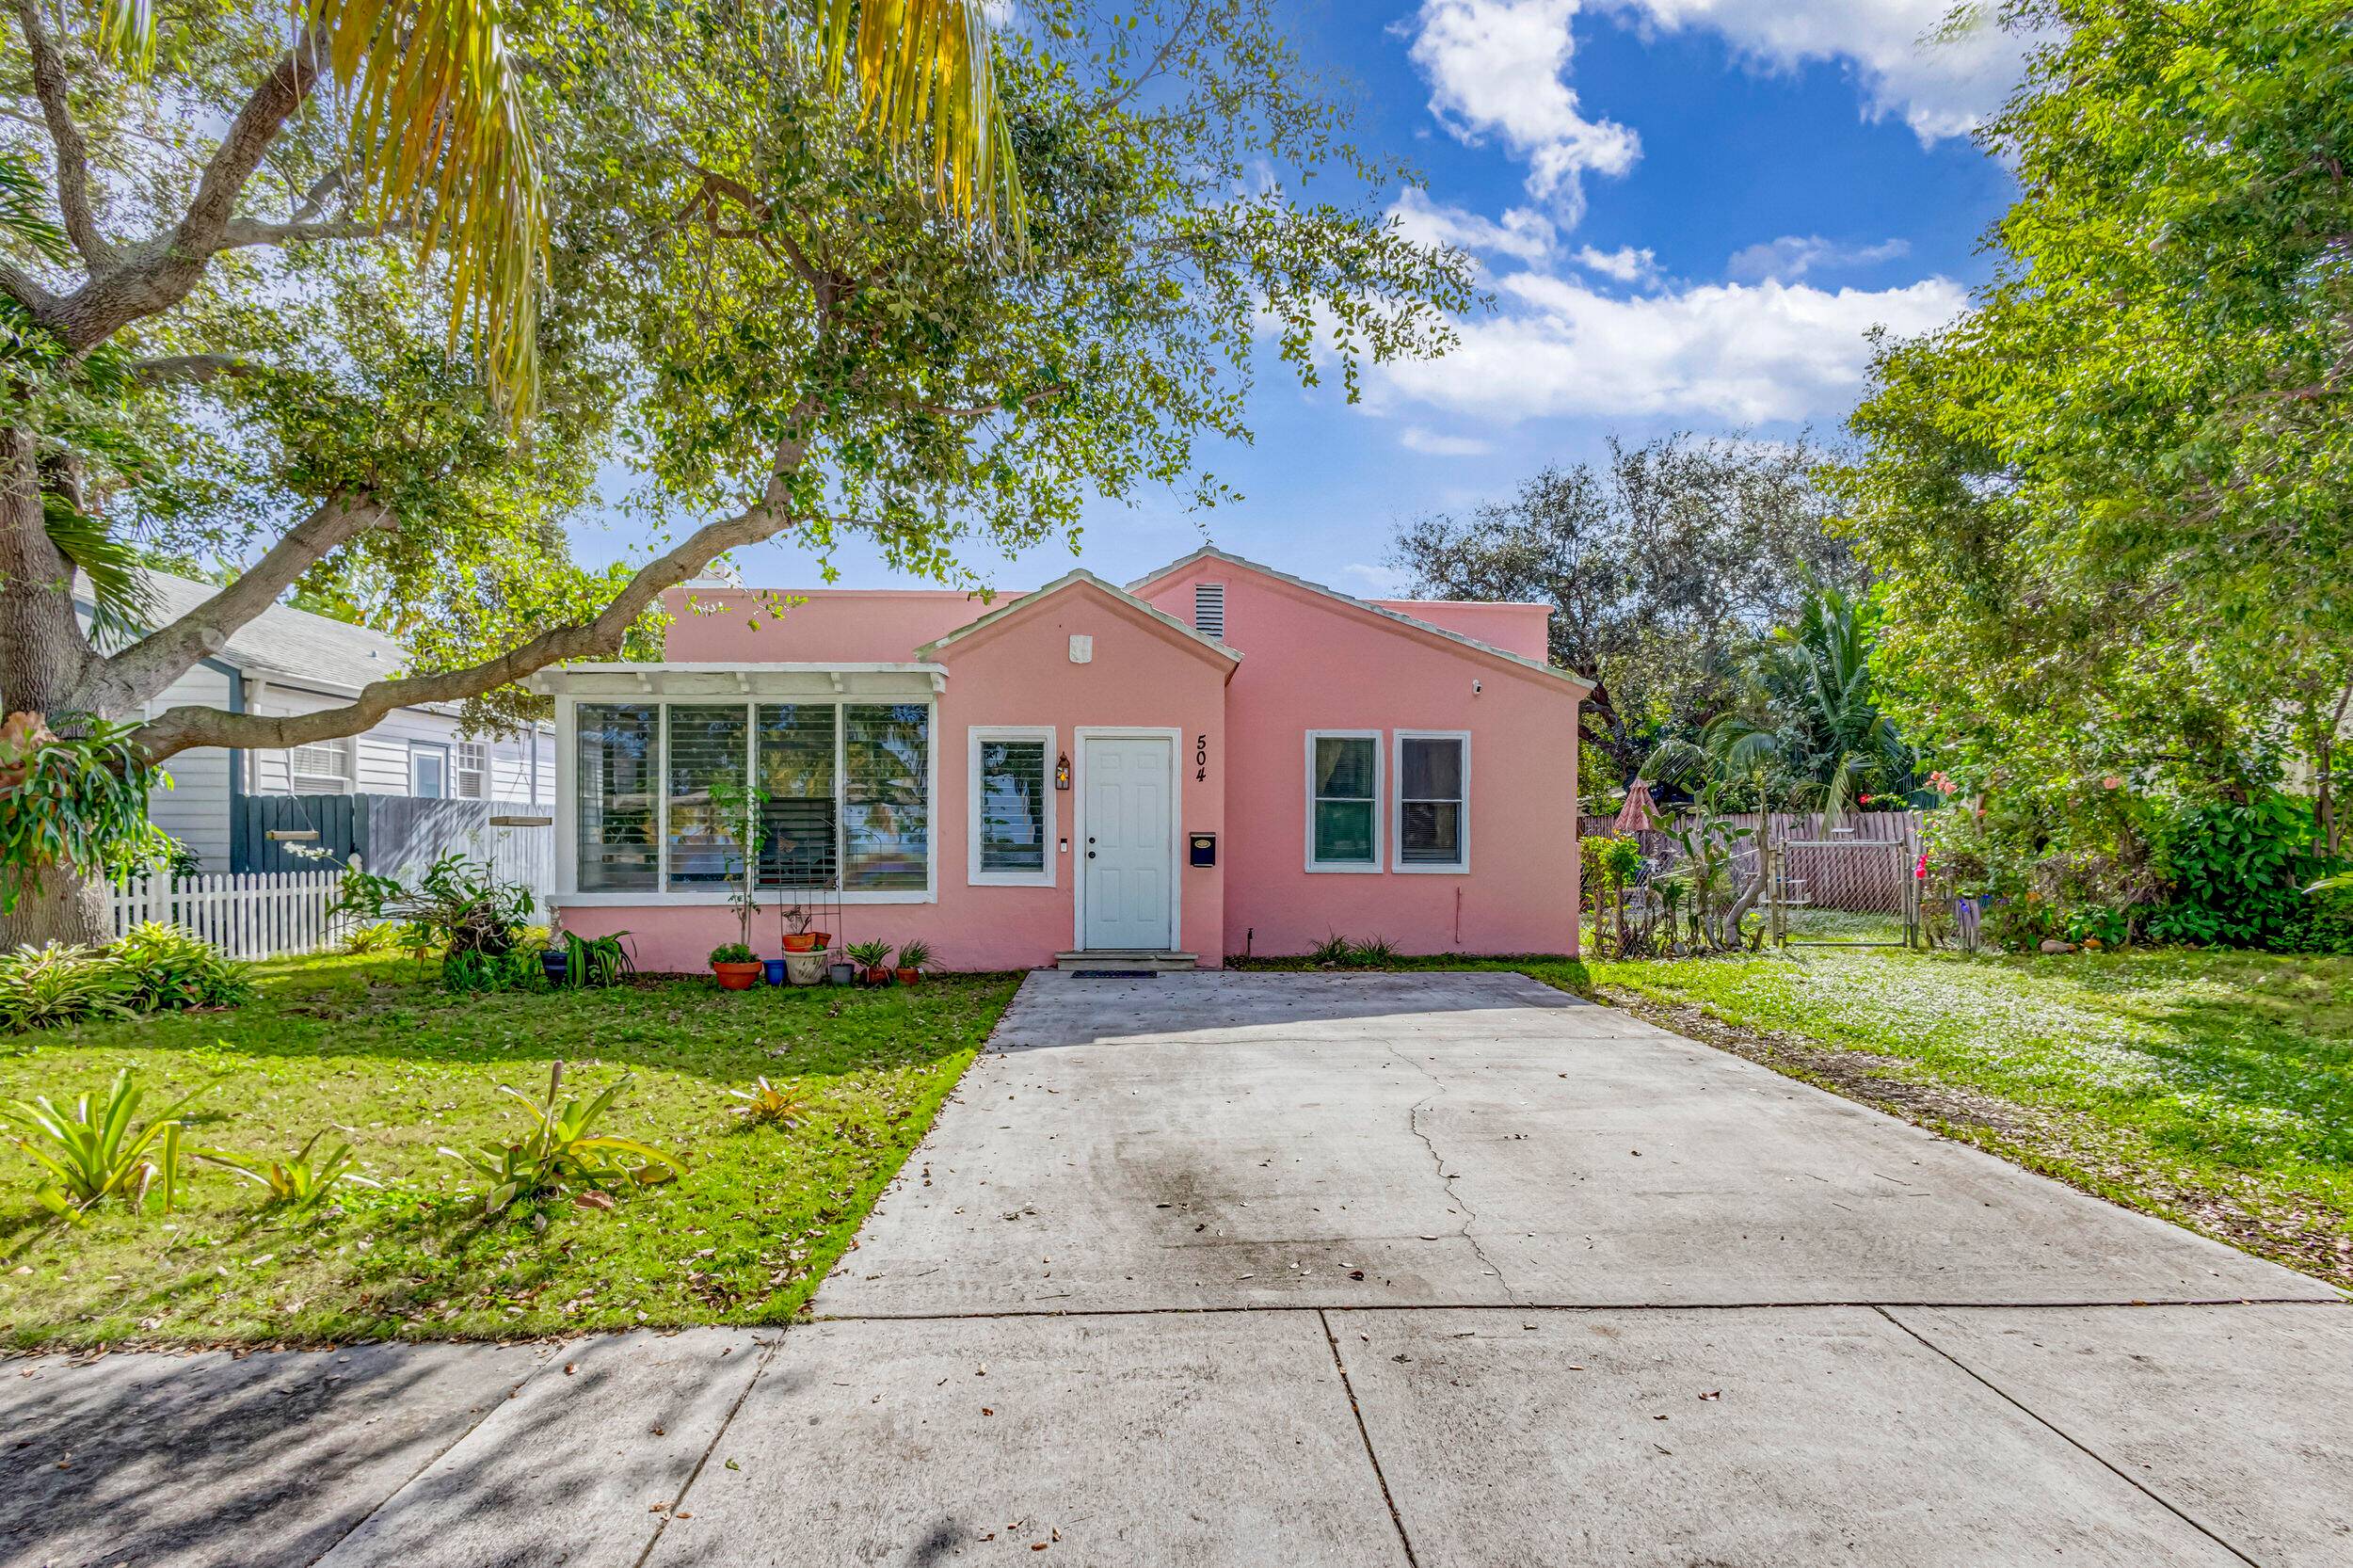 Welcome to this 1930 Spanish charmer located on an adorable Oak lined street just blocks from the intra coastal in the chic, extremely desirable Northwood neighborhood.